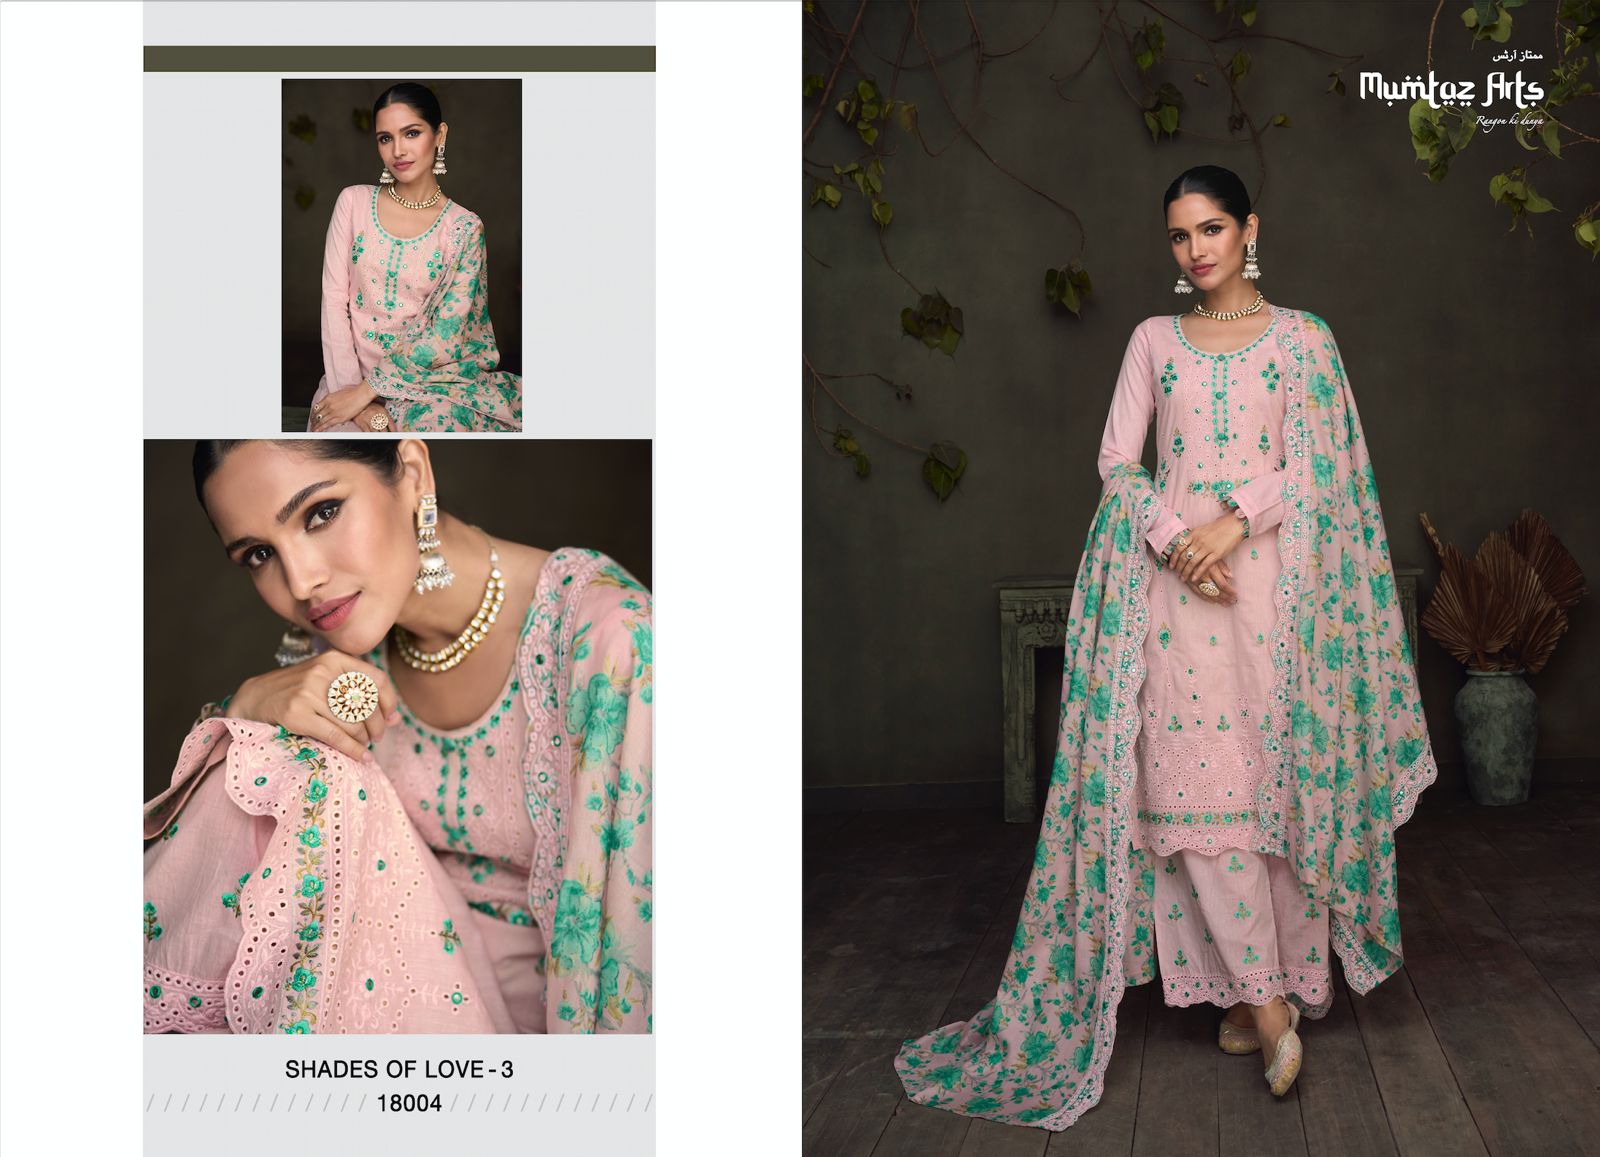 Mumtaz Shades Of Love 3 collection 1